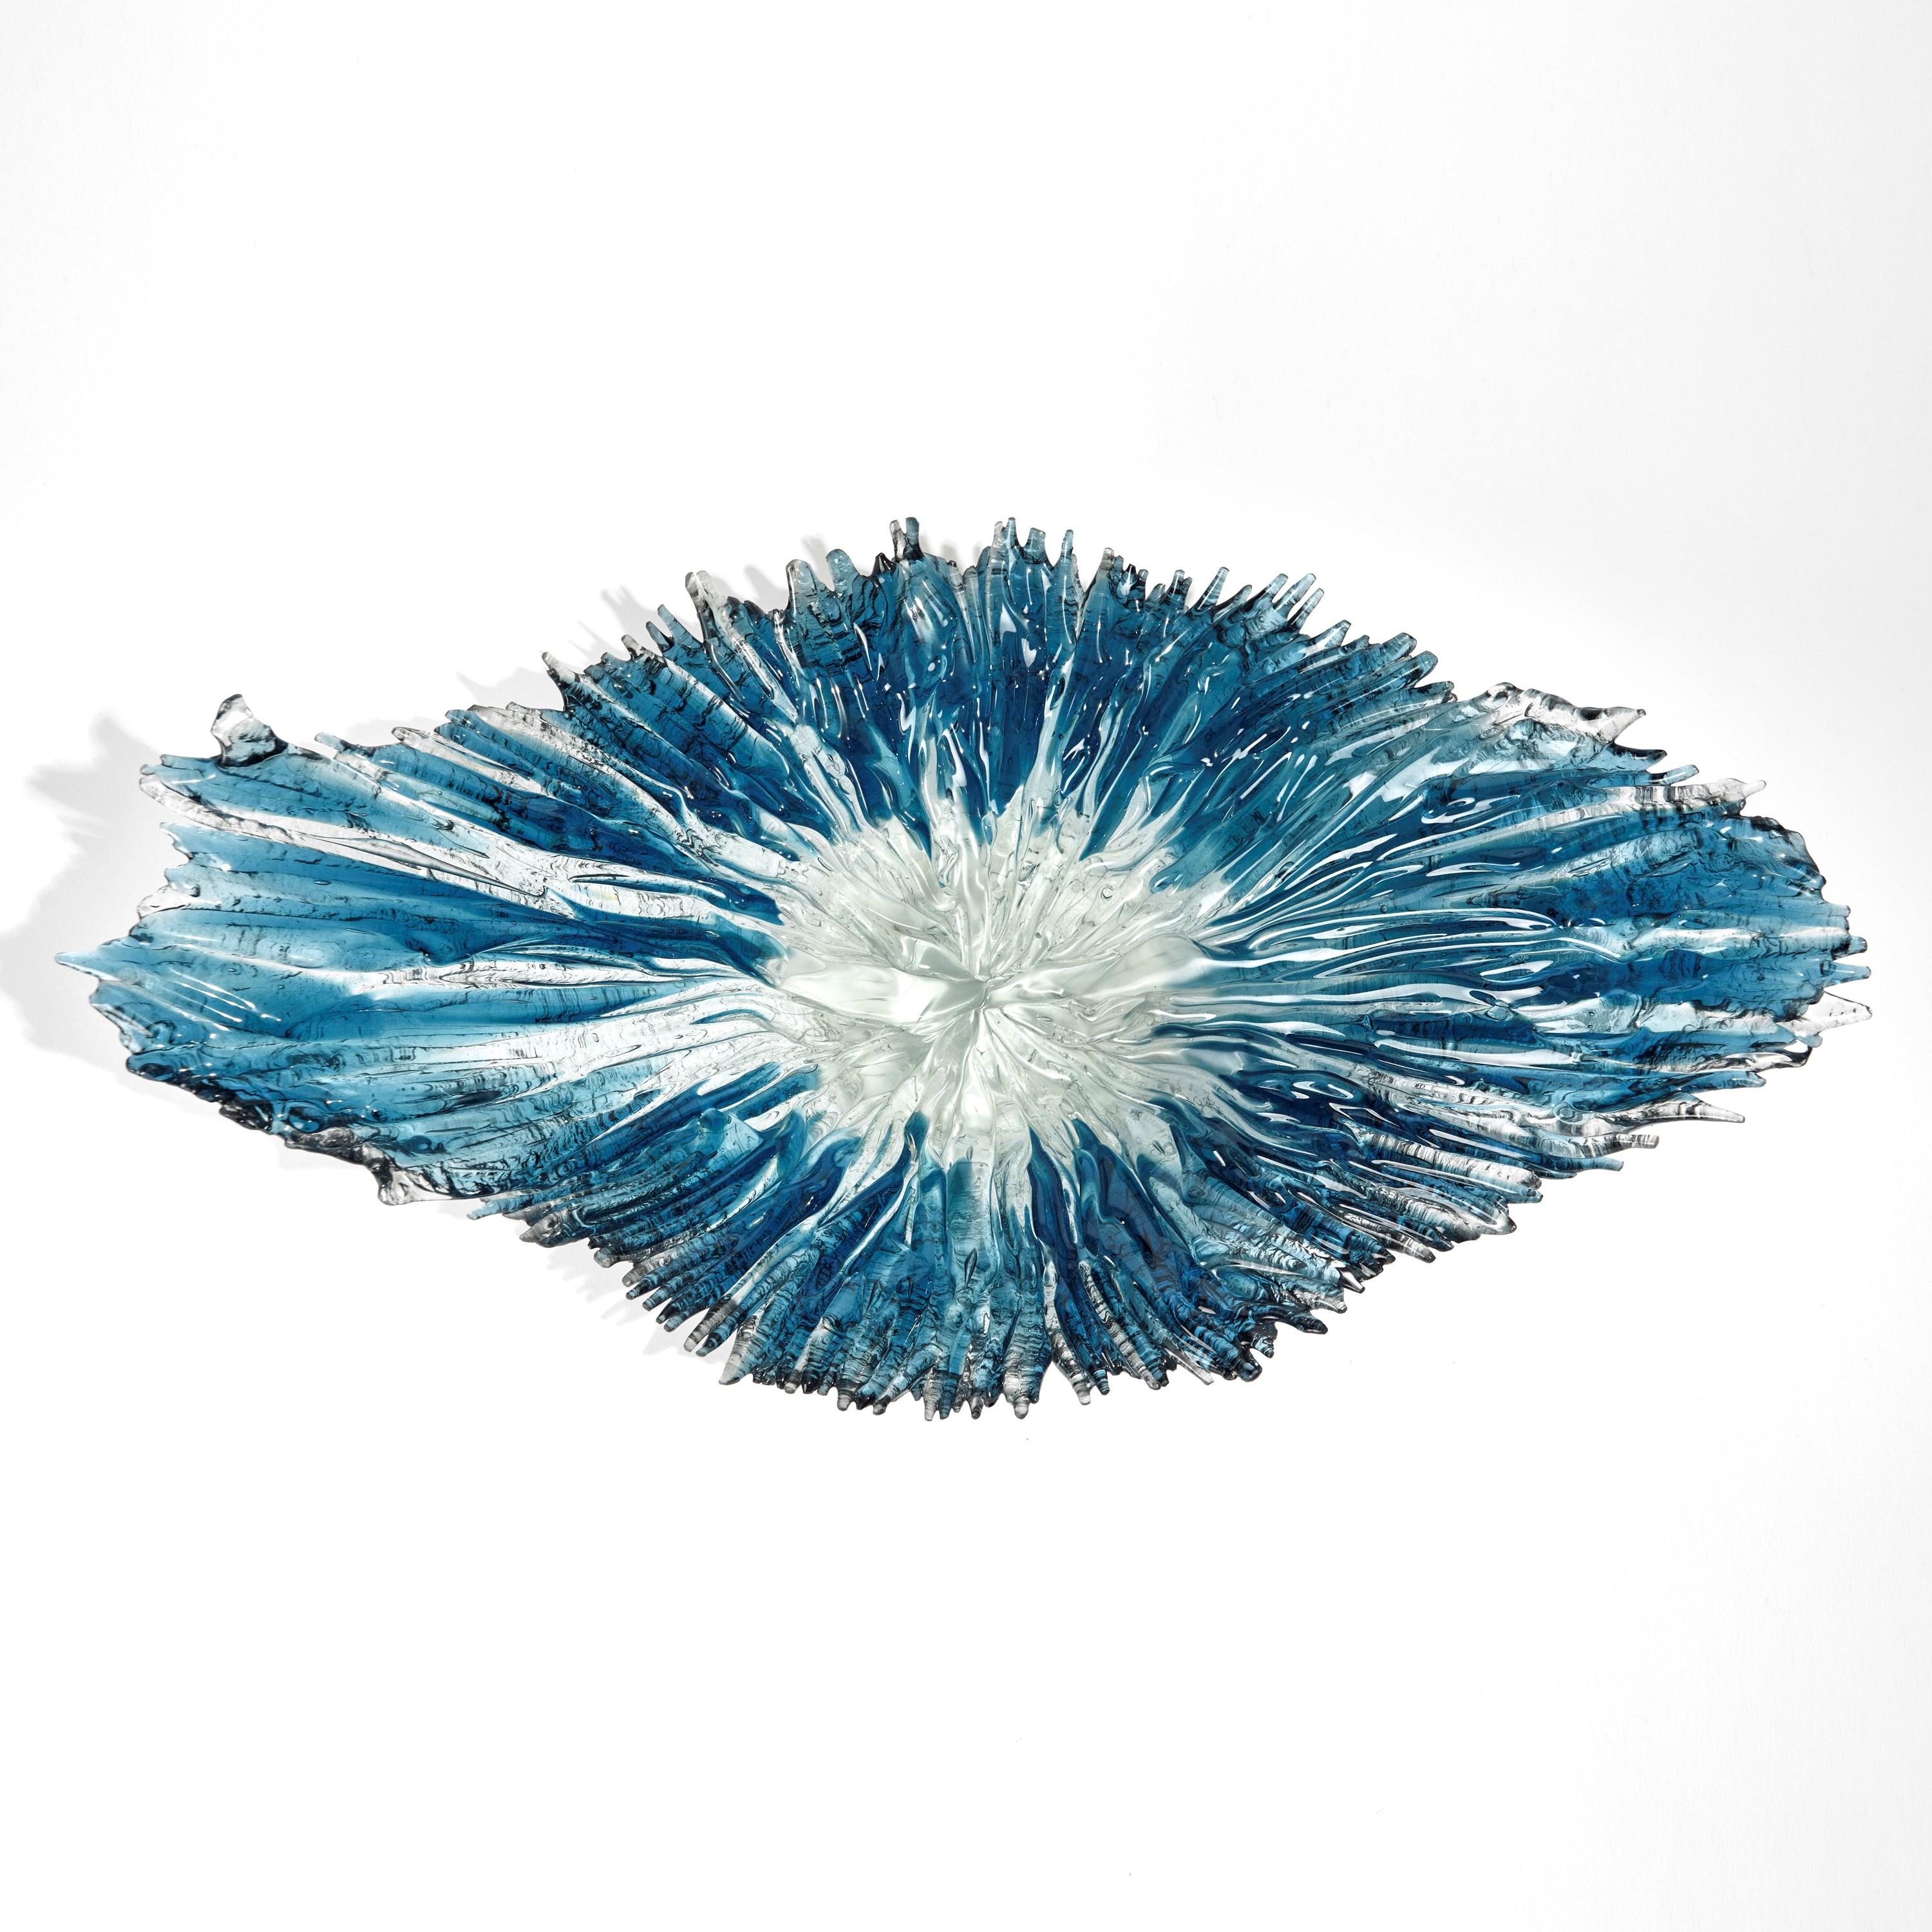 Hand-Crafted Oval Coral Bowl in Aqua, Turquoise & Clear Glass Centrepiece by Wayne Charmer